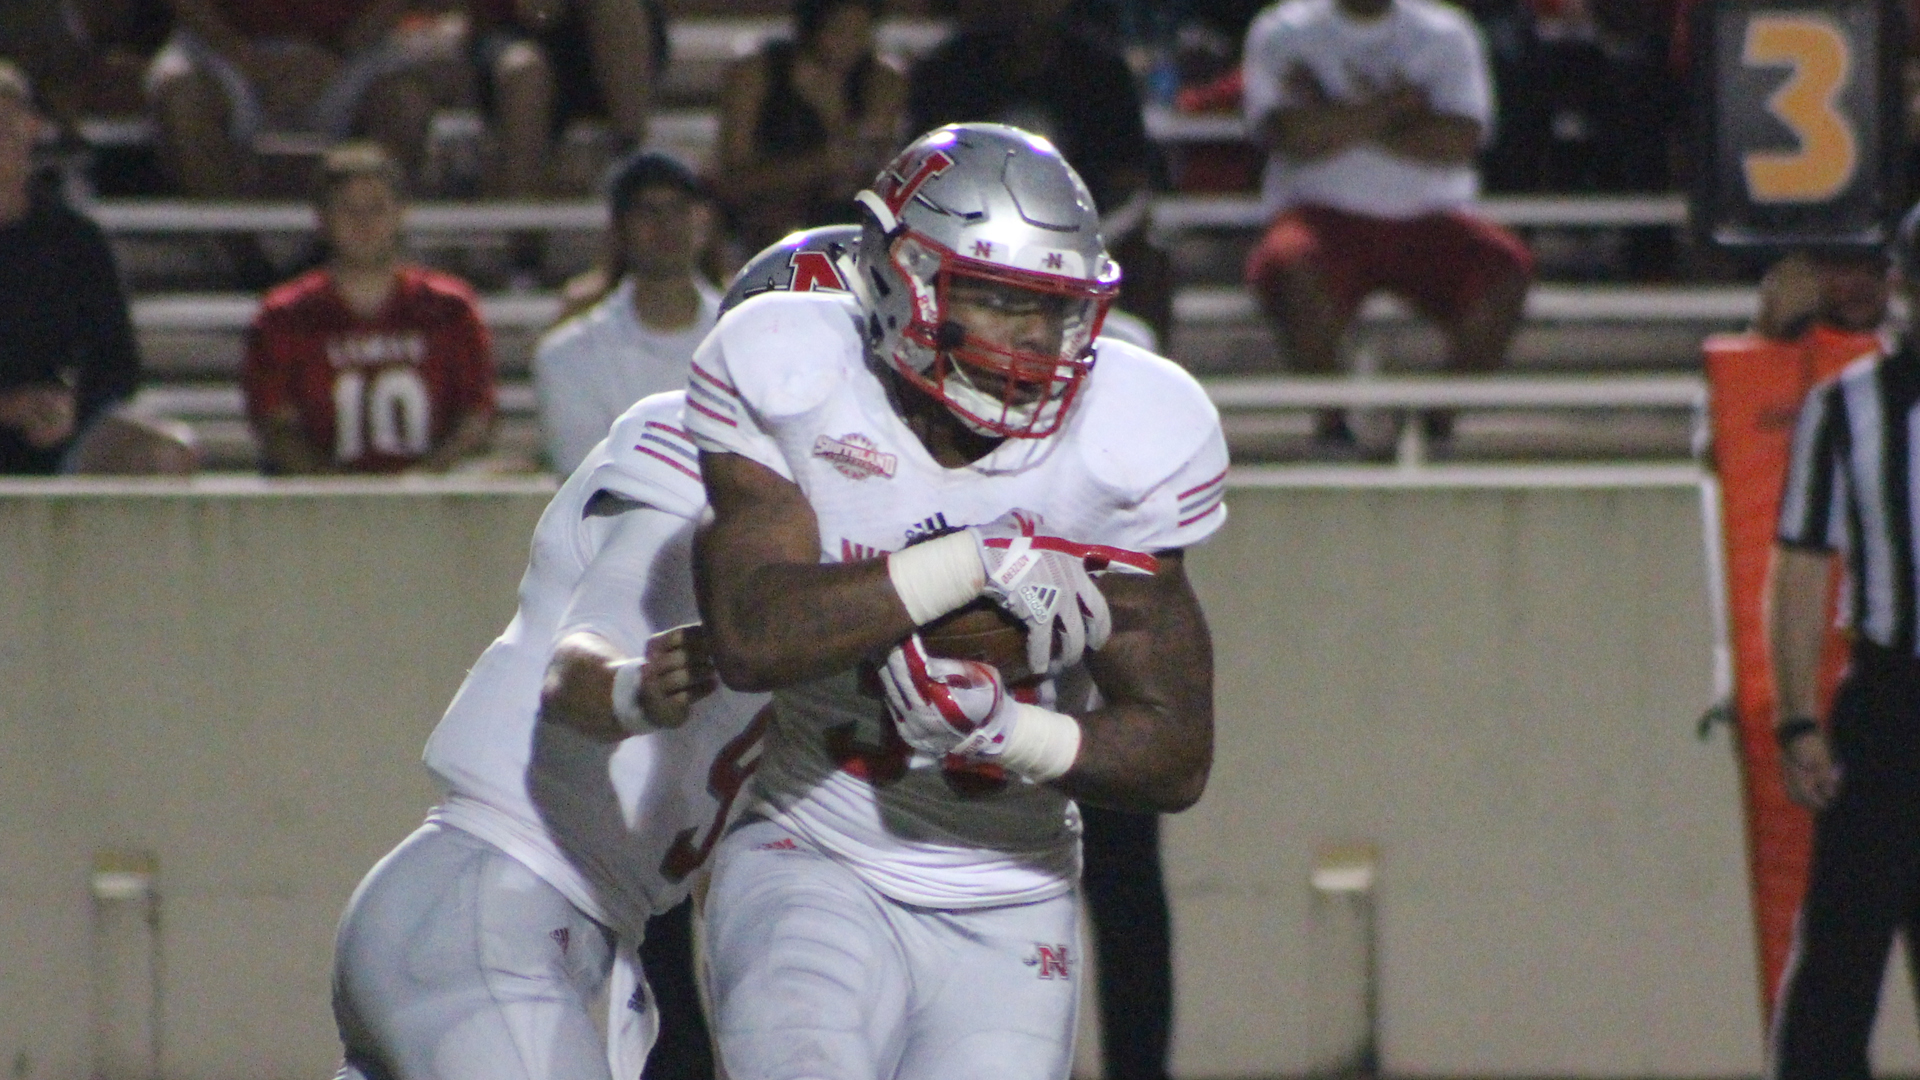 Running game powers Colonels past Lamar, 41-14